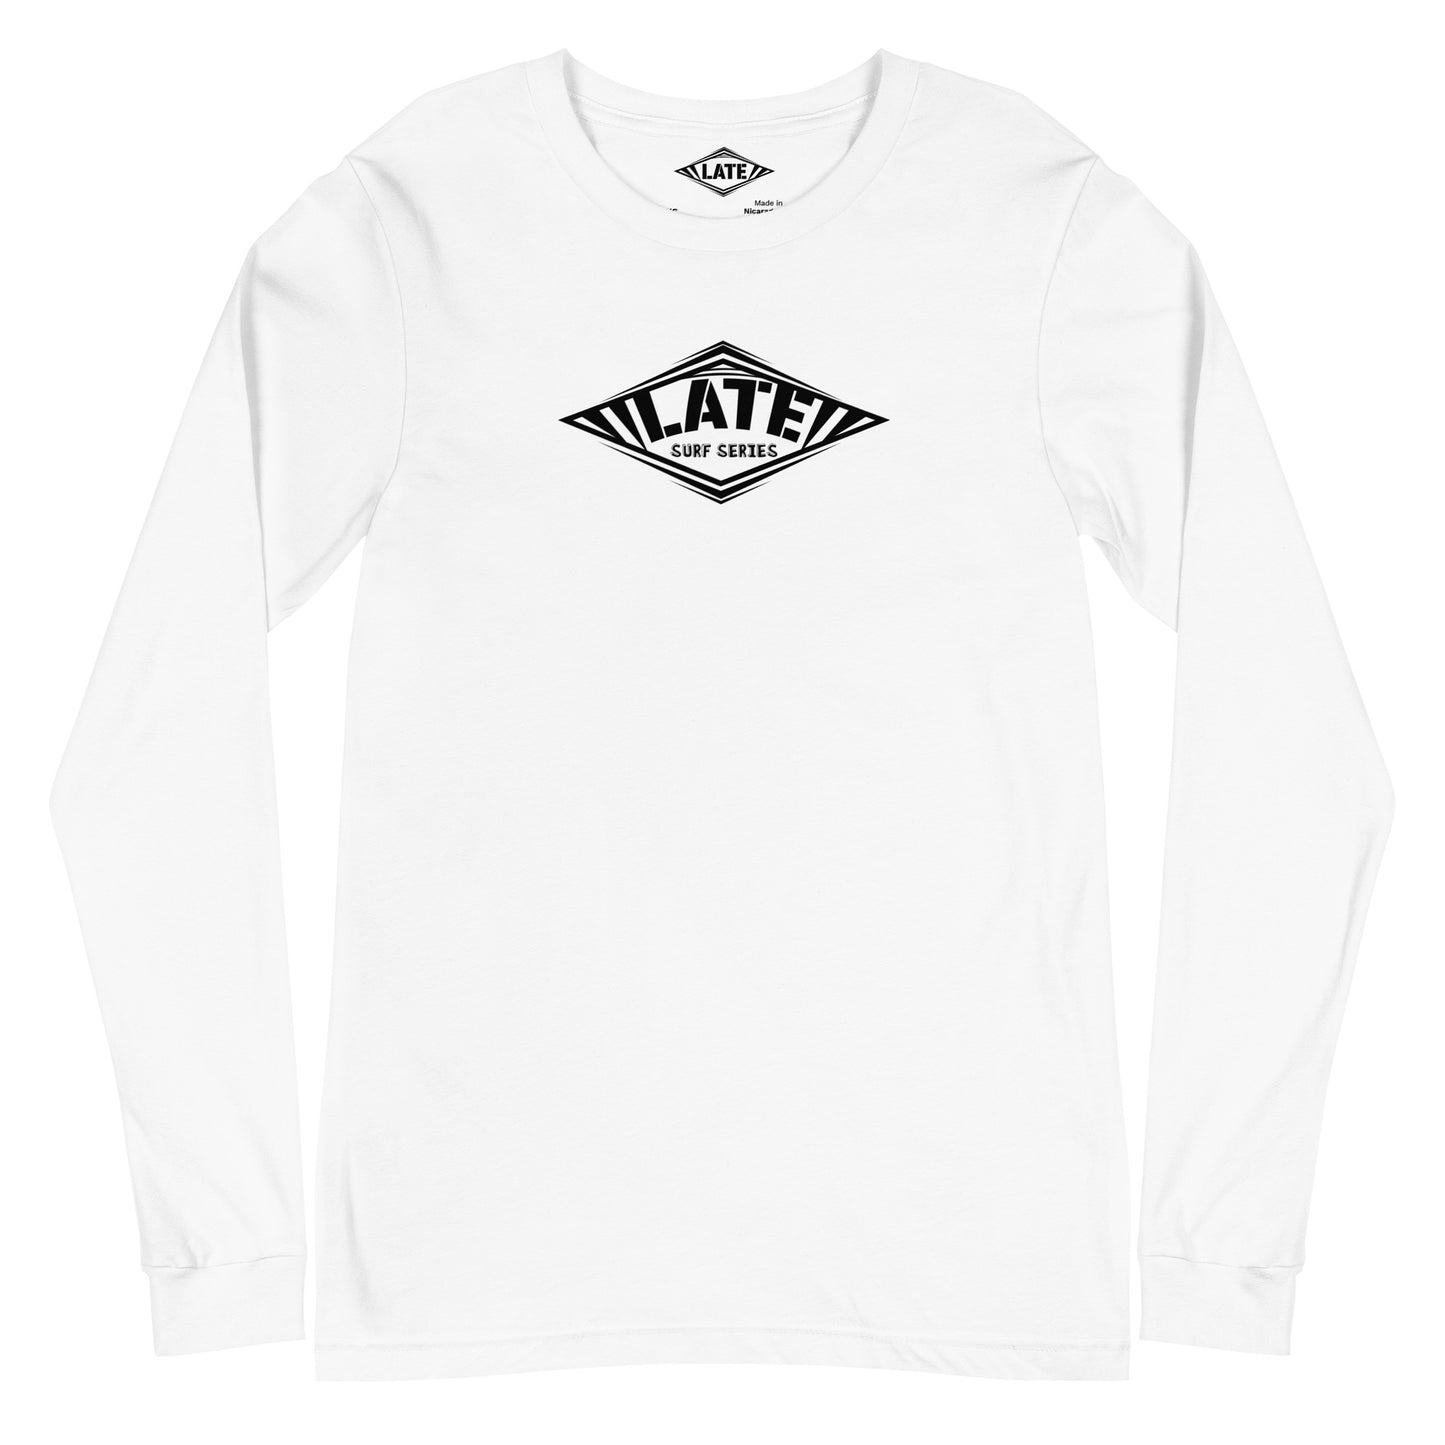 Long Sleeve Surf series Take On The Elements logo Late, unisex, face, couleur blanc